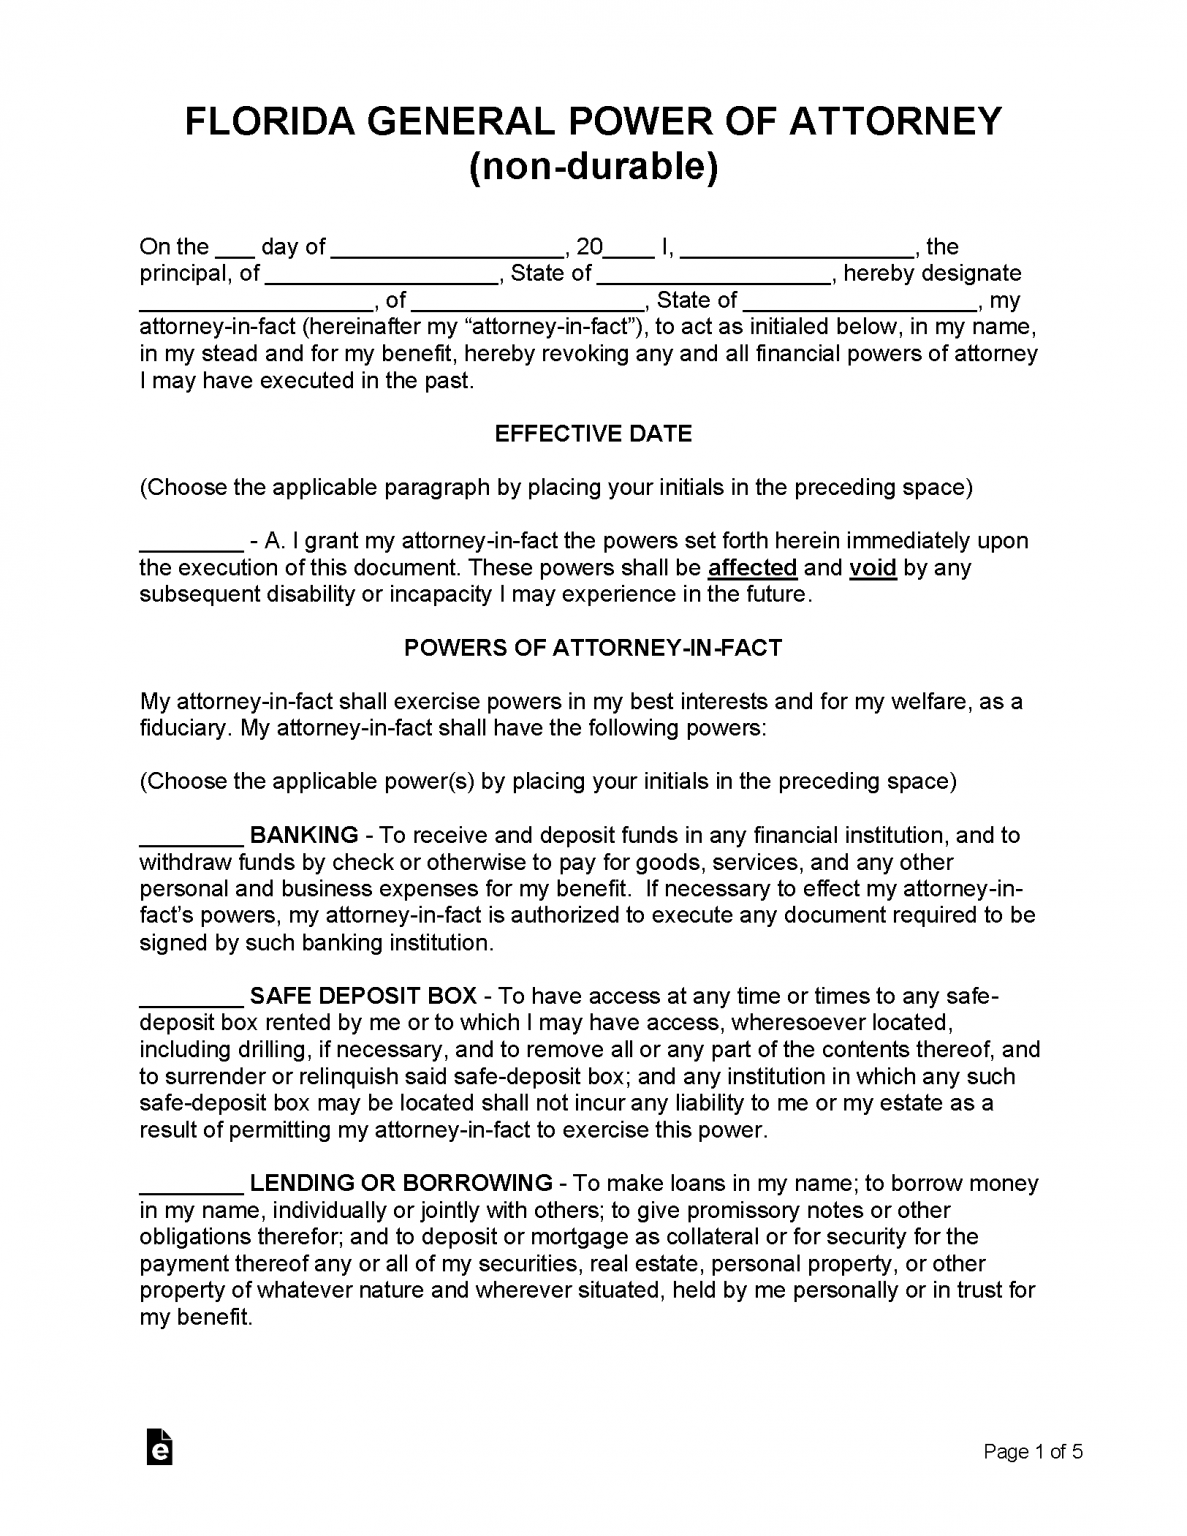 free-illinois-medical-power-of-attorney-form-pdf-word